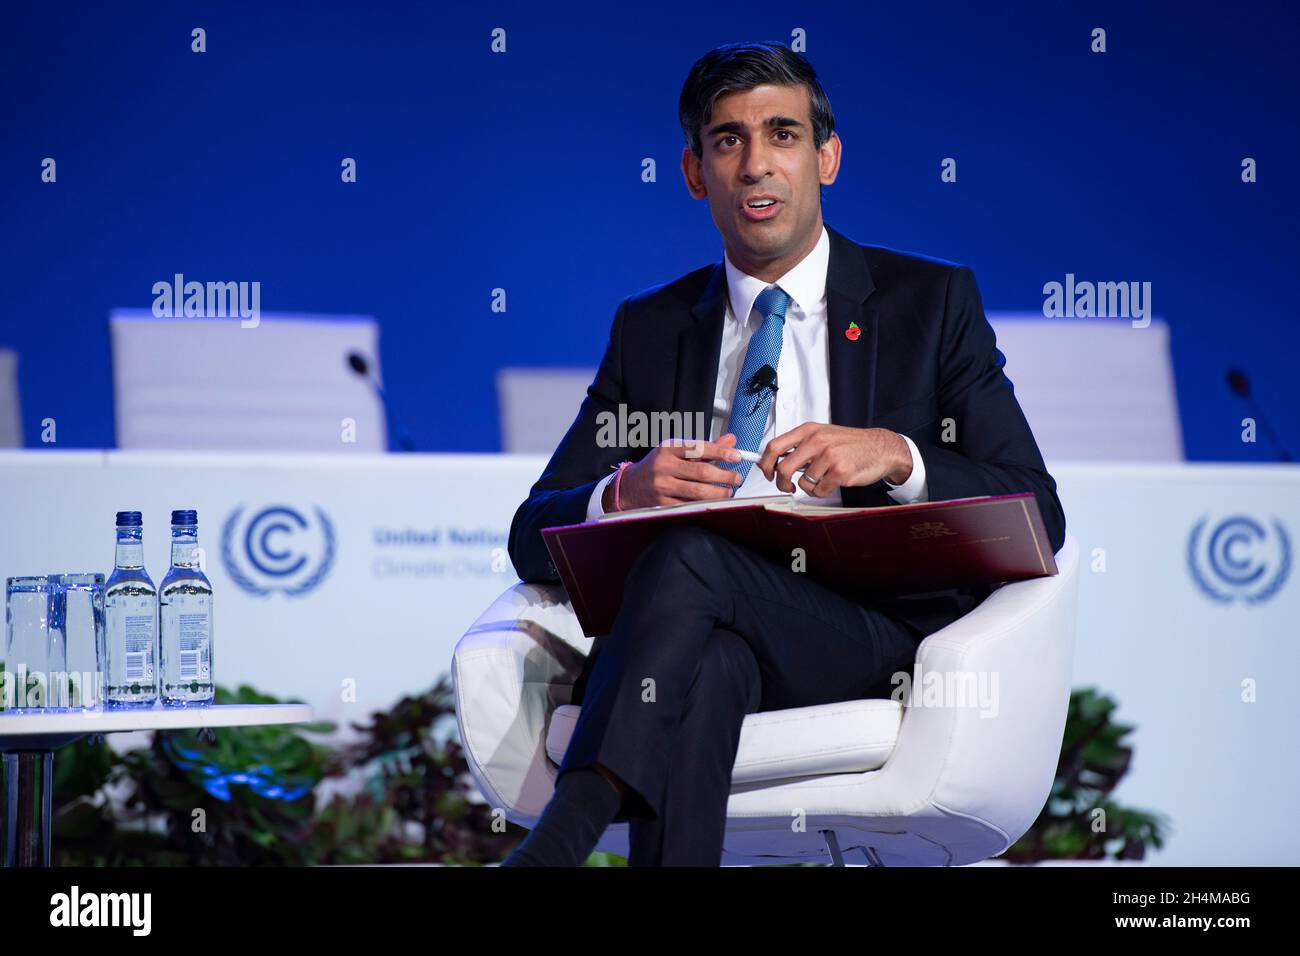 Glasgow, Scotland, UK. 3rd Nov, 2021. PICTURED:Rt Hon Rishi Sunak, UK Chancellor of the Exchequer, seen addressing countries about finance at COP26 climate change summit in Glasgow. Sunak chaired a panel discussion on 'Supporting a financial system for a net zero and resilient future'. He invited speakers (from left to right): Minister of economy, Arbelche Azucena, Uruguay; Mathias Cormann, Secretary General OECD; Alison Rose, Chief Executive NatWest Group; Carlos Dominguez, secretary of finance, Philippines; UK Chanceller of the Exchequer, Rishi Sunak. Credit: Colin Fisher/Alamy Live News Stock Photo